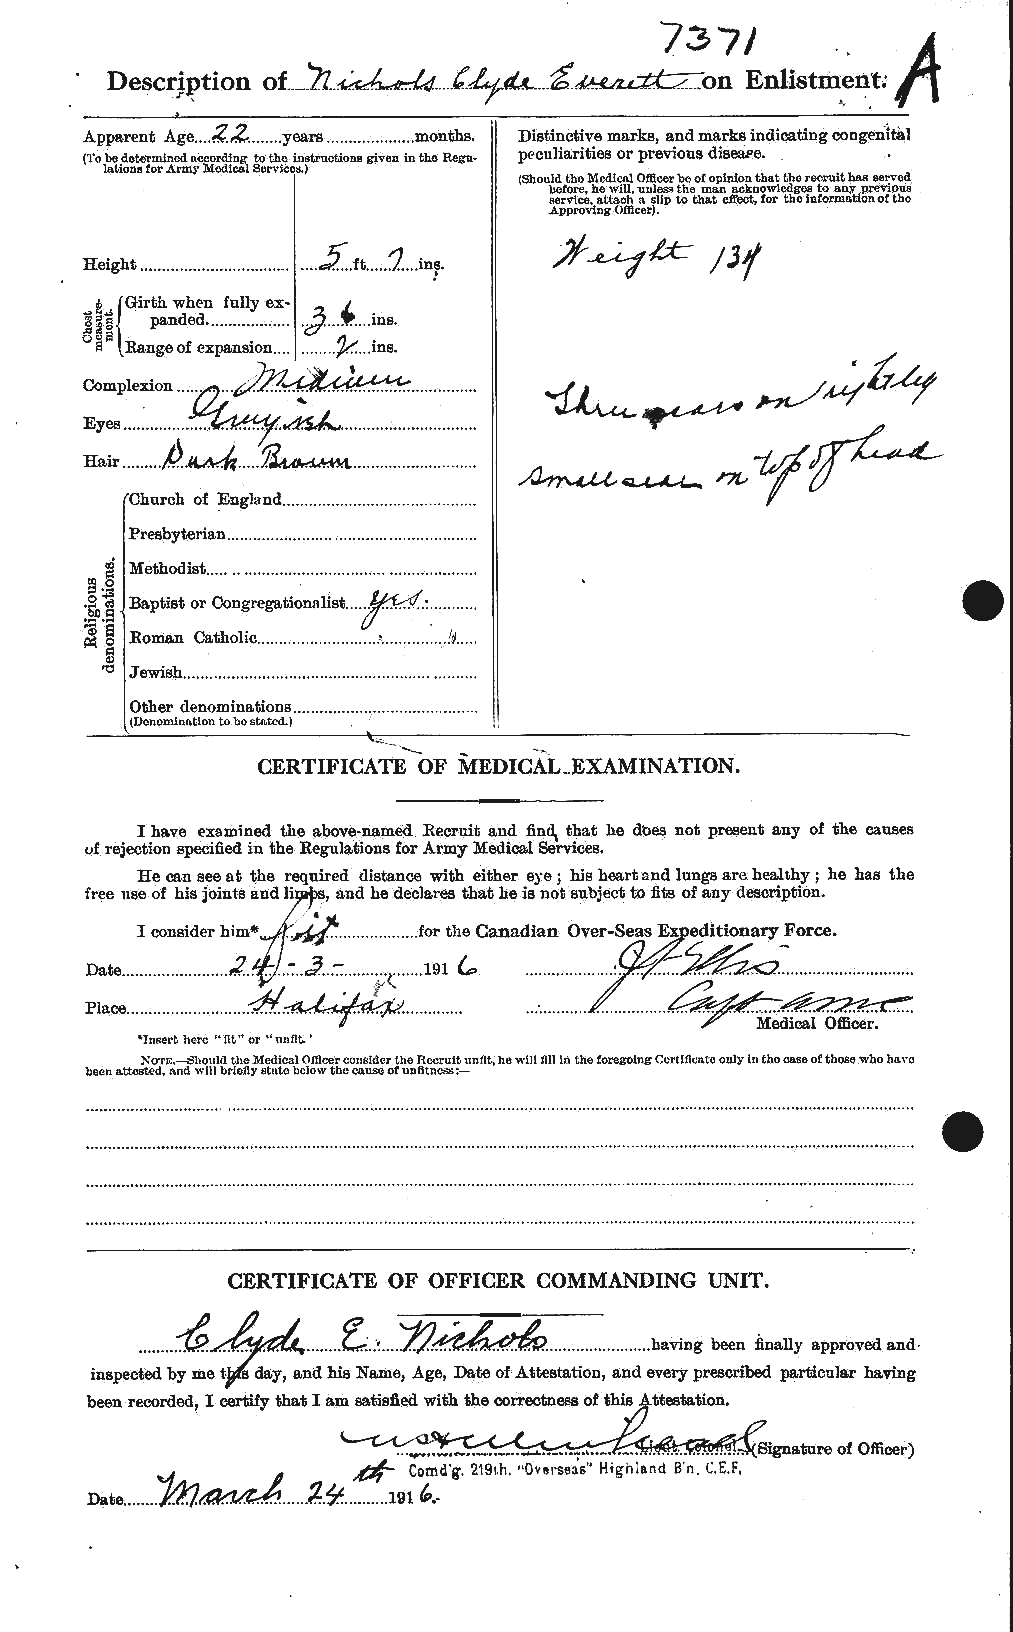 Personnel Records of the First World War - CEF 550940b